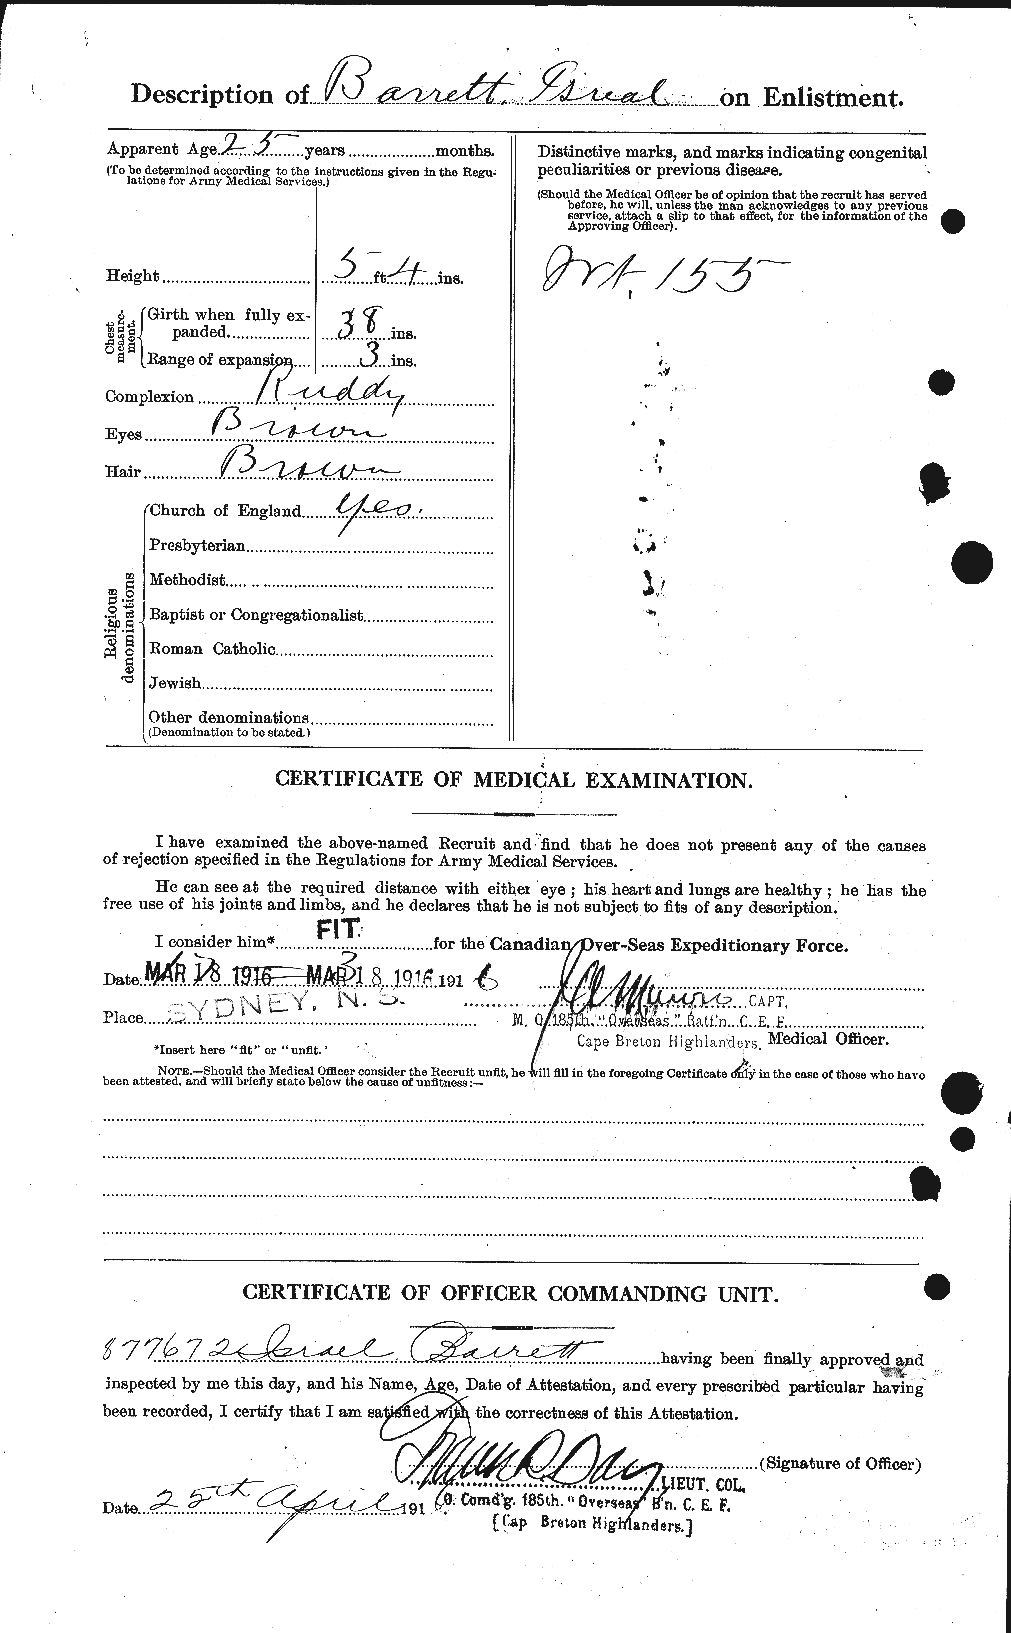 Personnel Records of the First World War - CEF 220269b